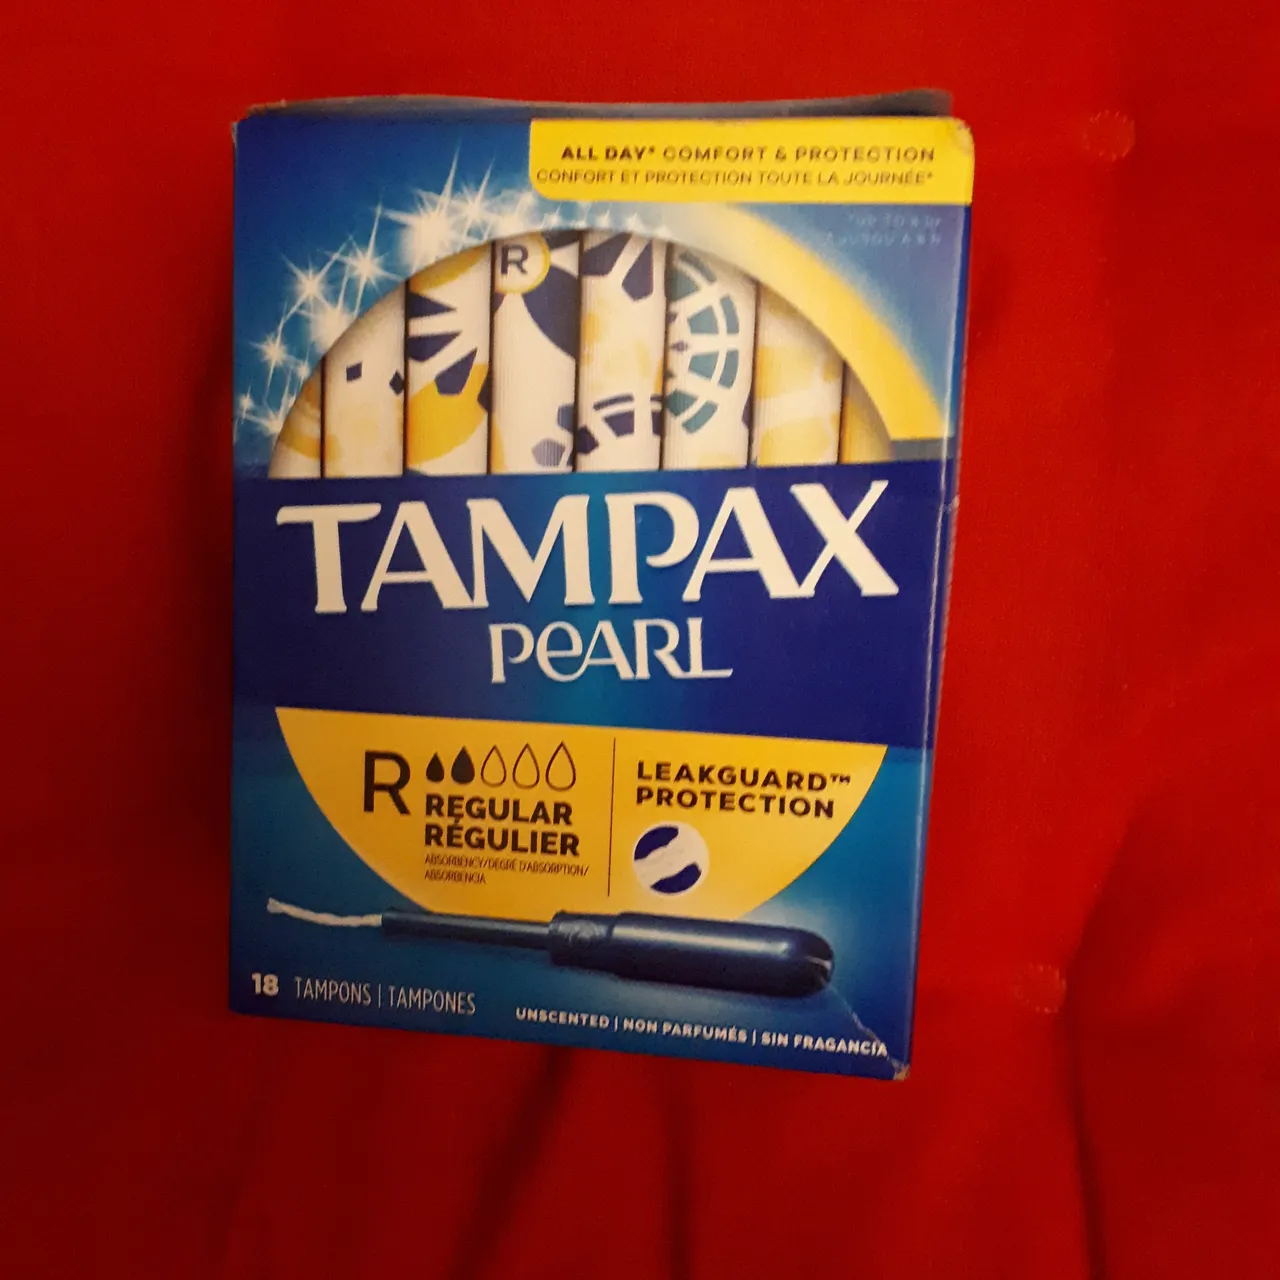 Tampax Tampons photo 1